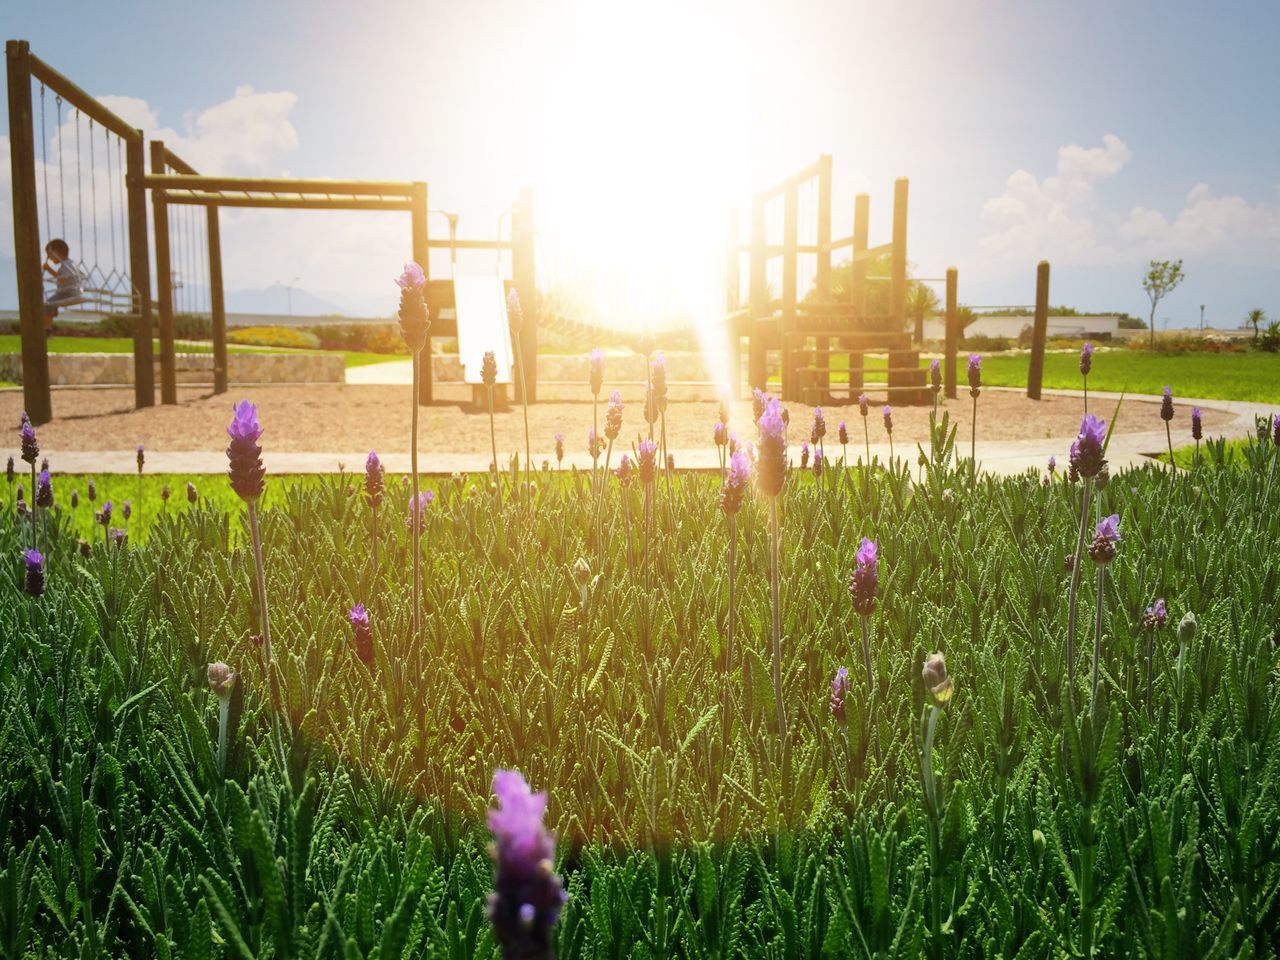 grass, field, flower, sunlight, growth, sky, sun, grassy, plant, sunbeam, building exterior, built structure, green color, freshness, lens flare, nature, lawn, architecture, day, beauty in nature